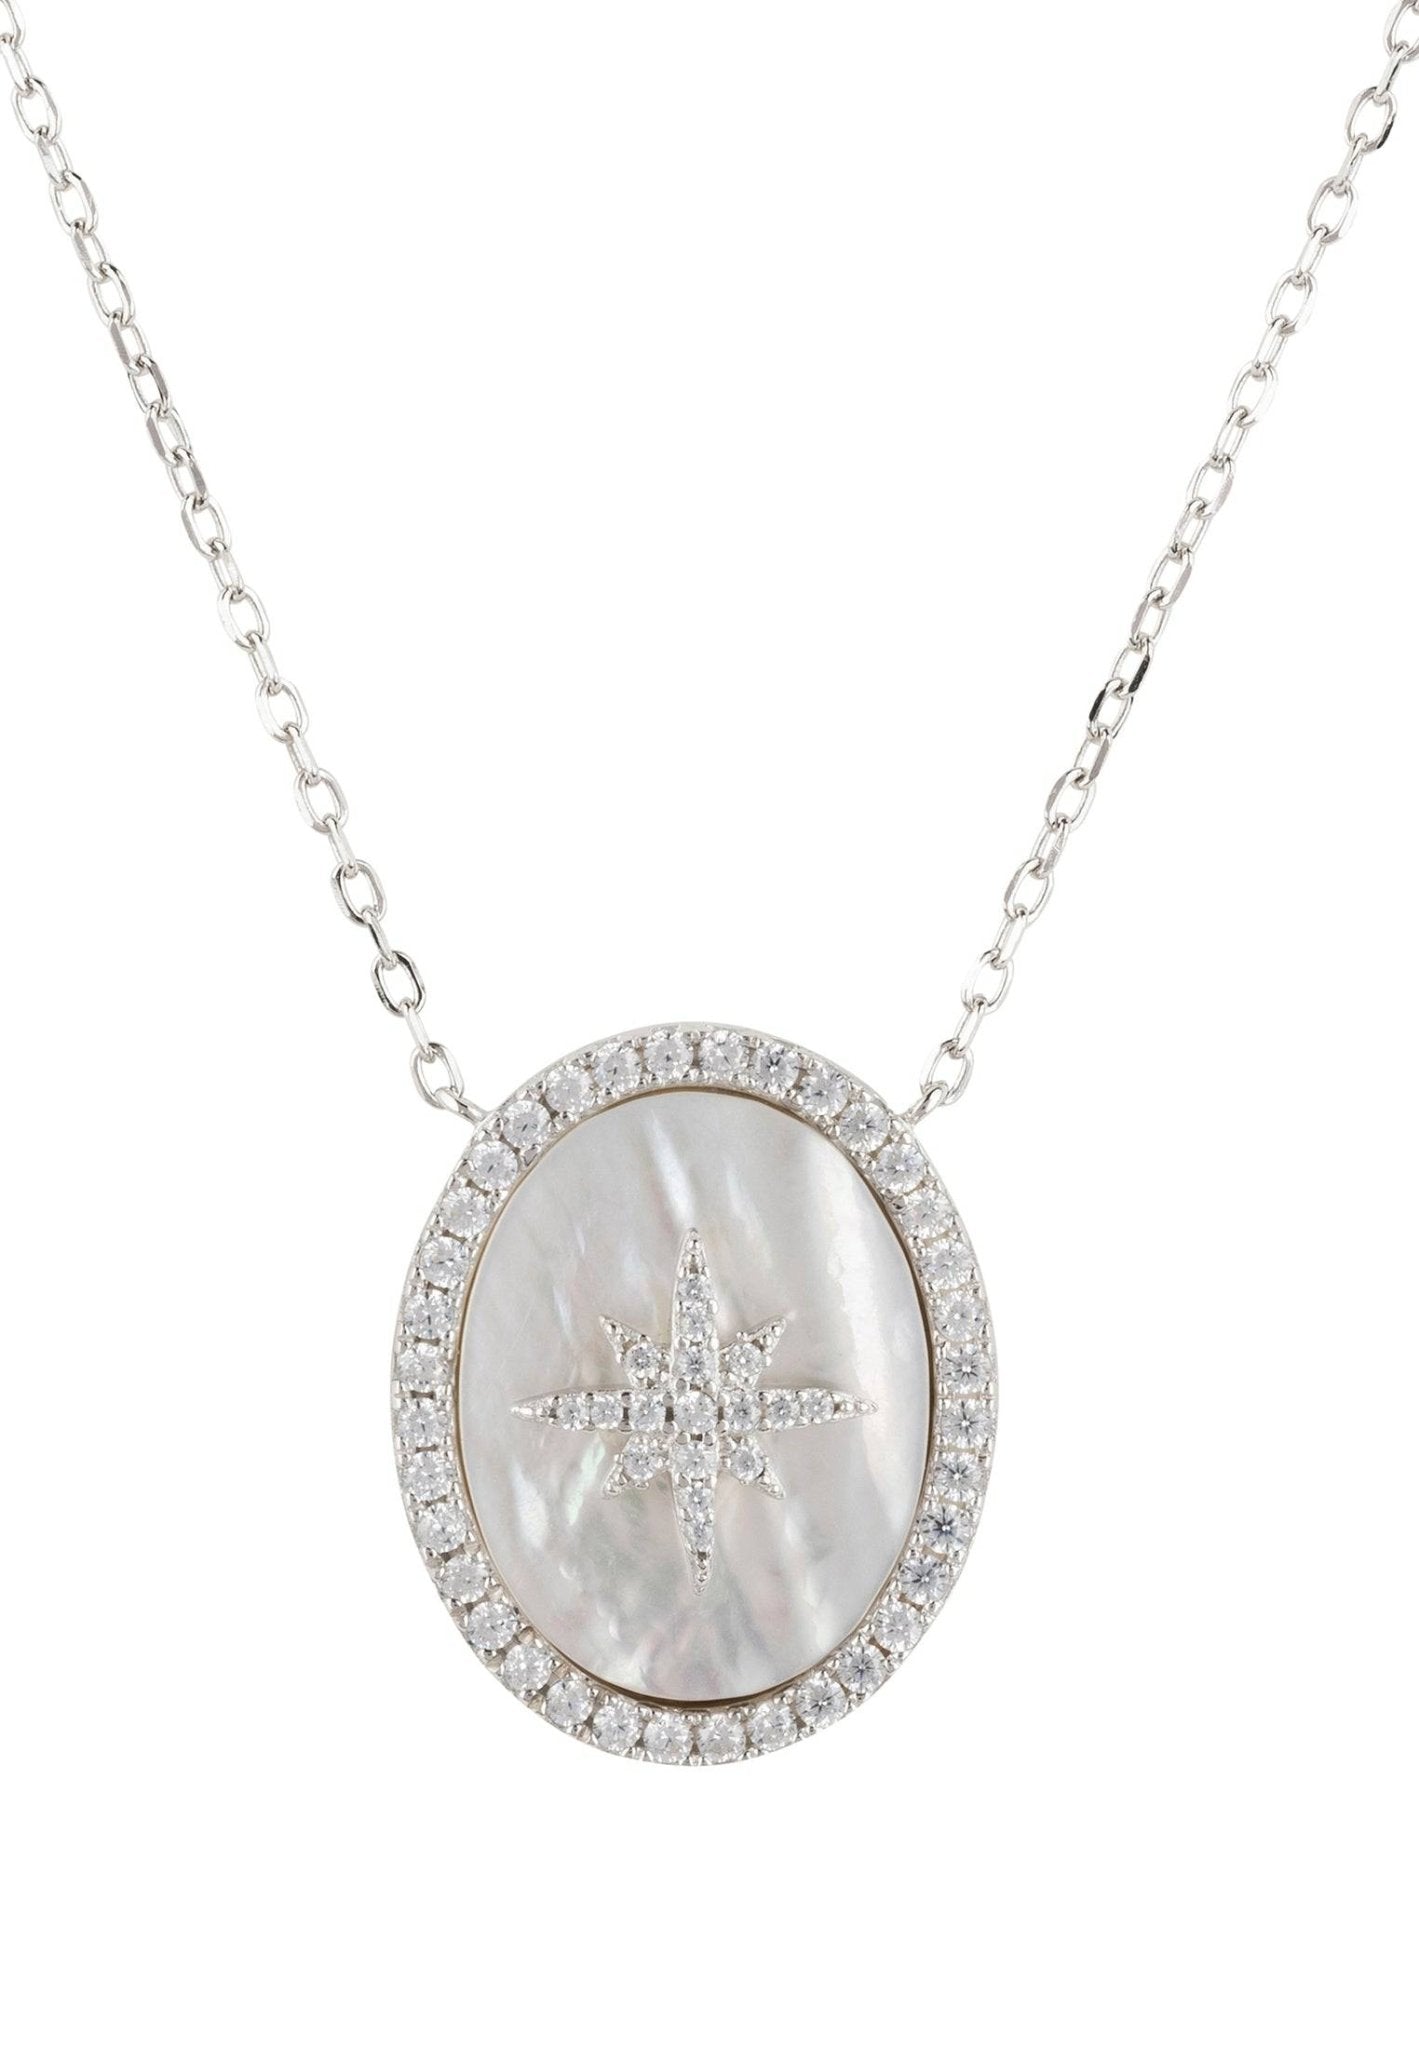 Starburst Oval Pendant Necklace Mother Of Pearl Silver - LATELITA Necklaces